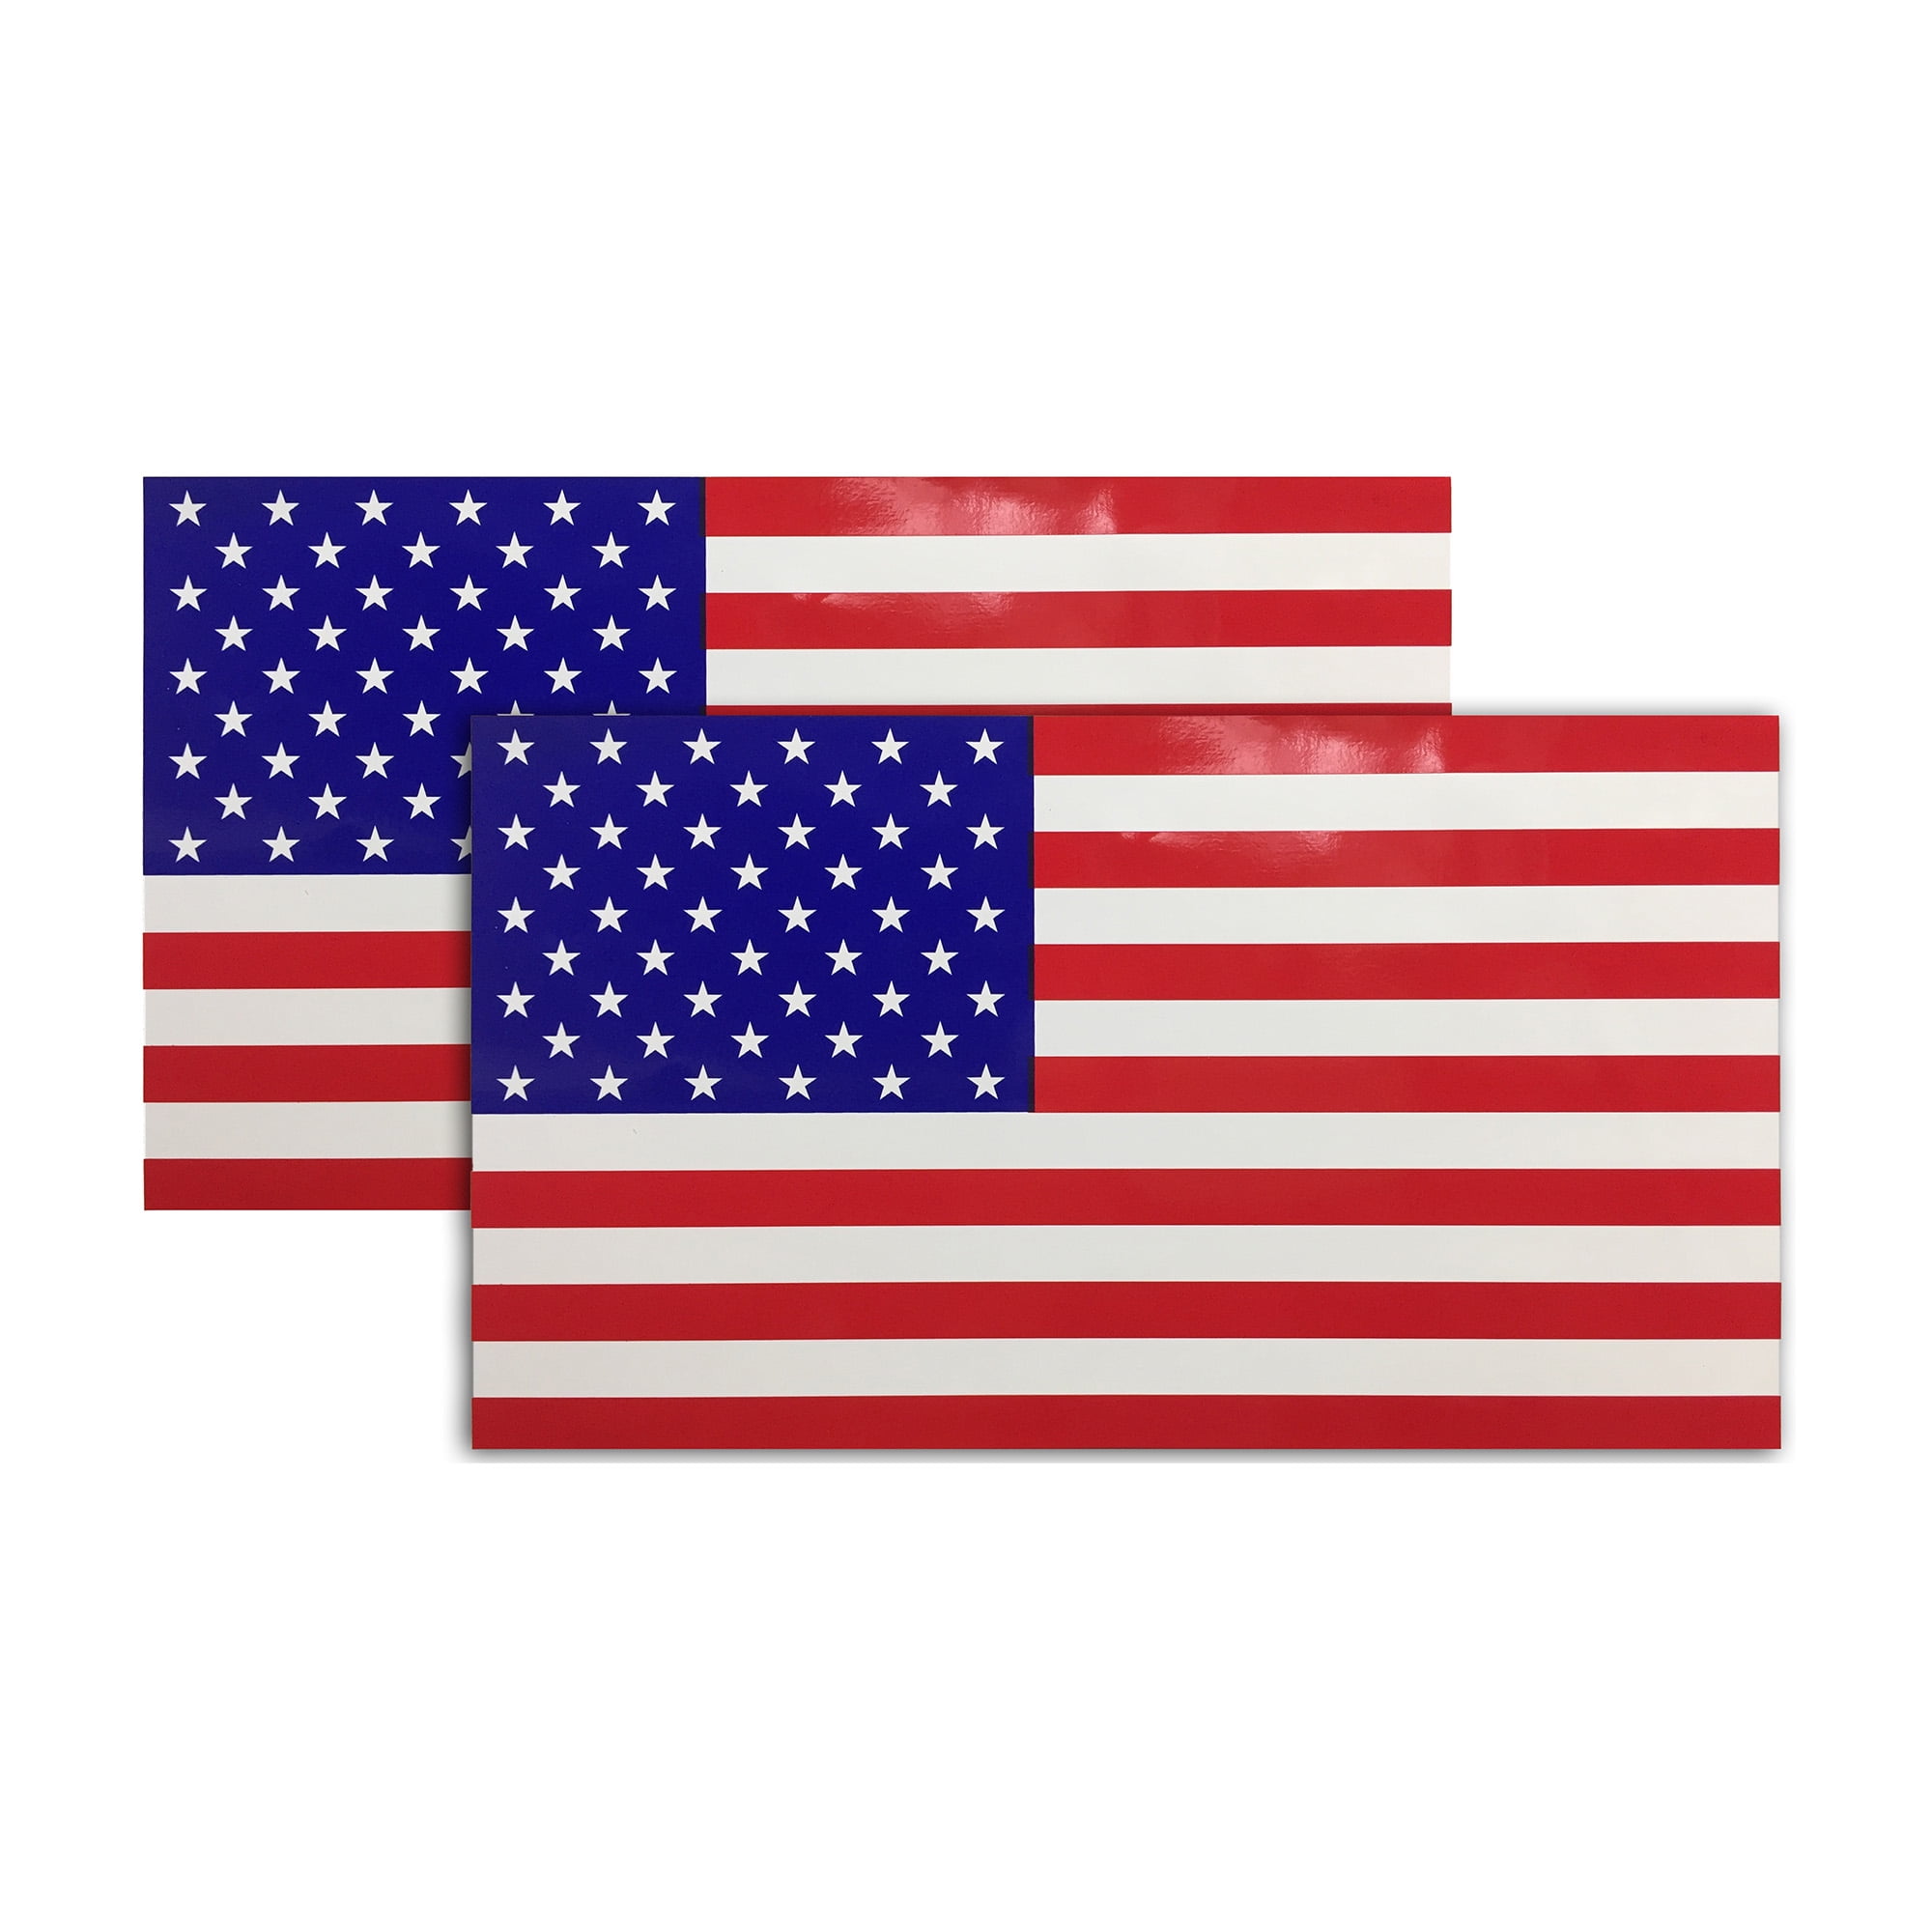 INC American Flag COVID-19 Support Oval Car Magnets SJT12706 We Support All Essential Workers SJT ENTERPRISES Coronavirus